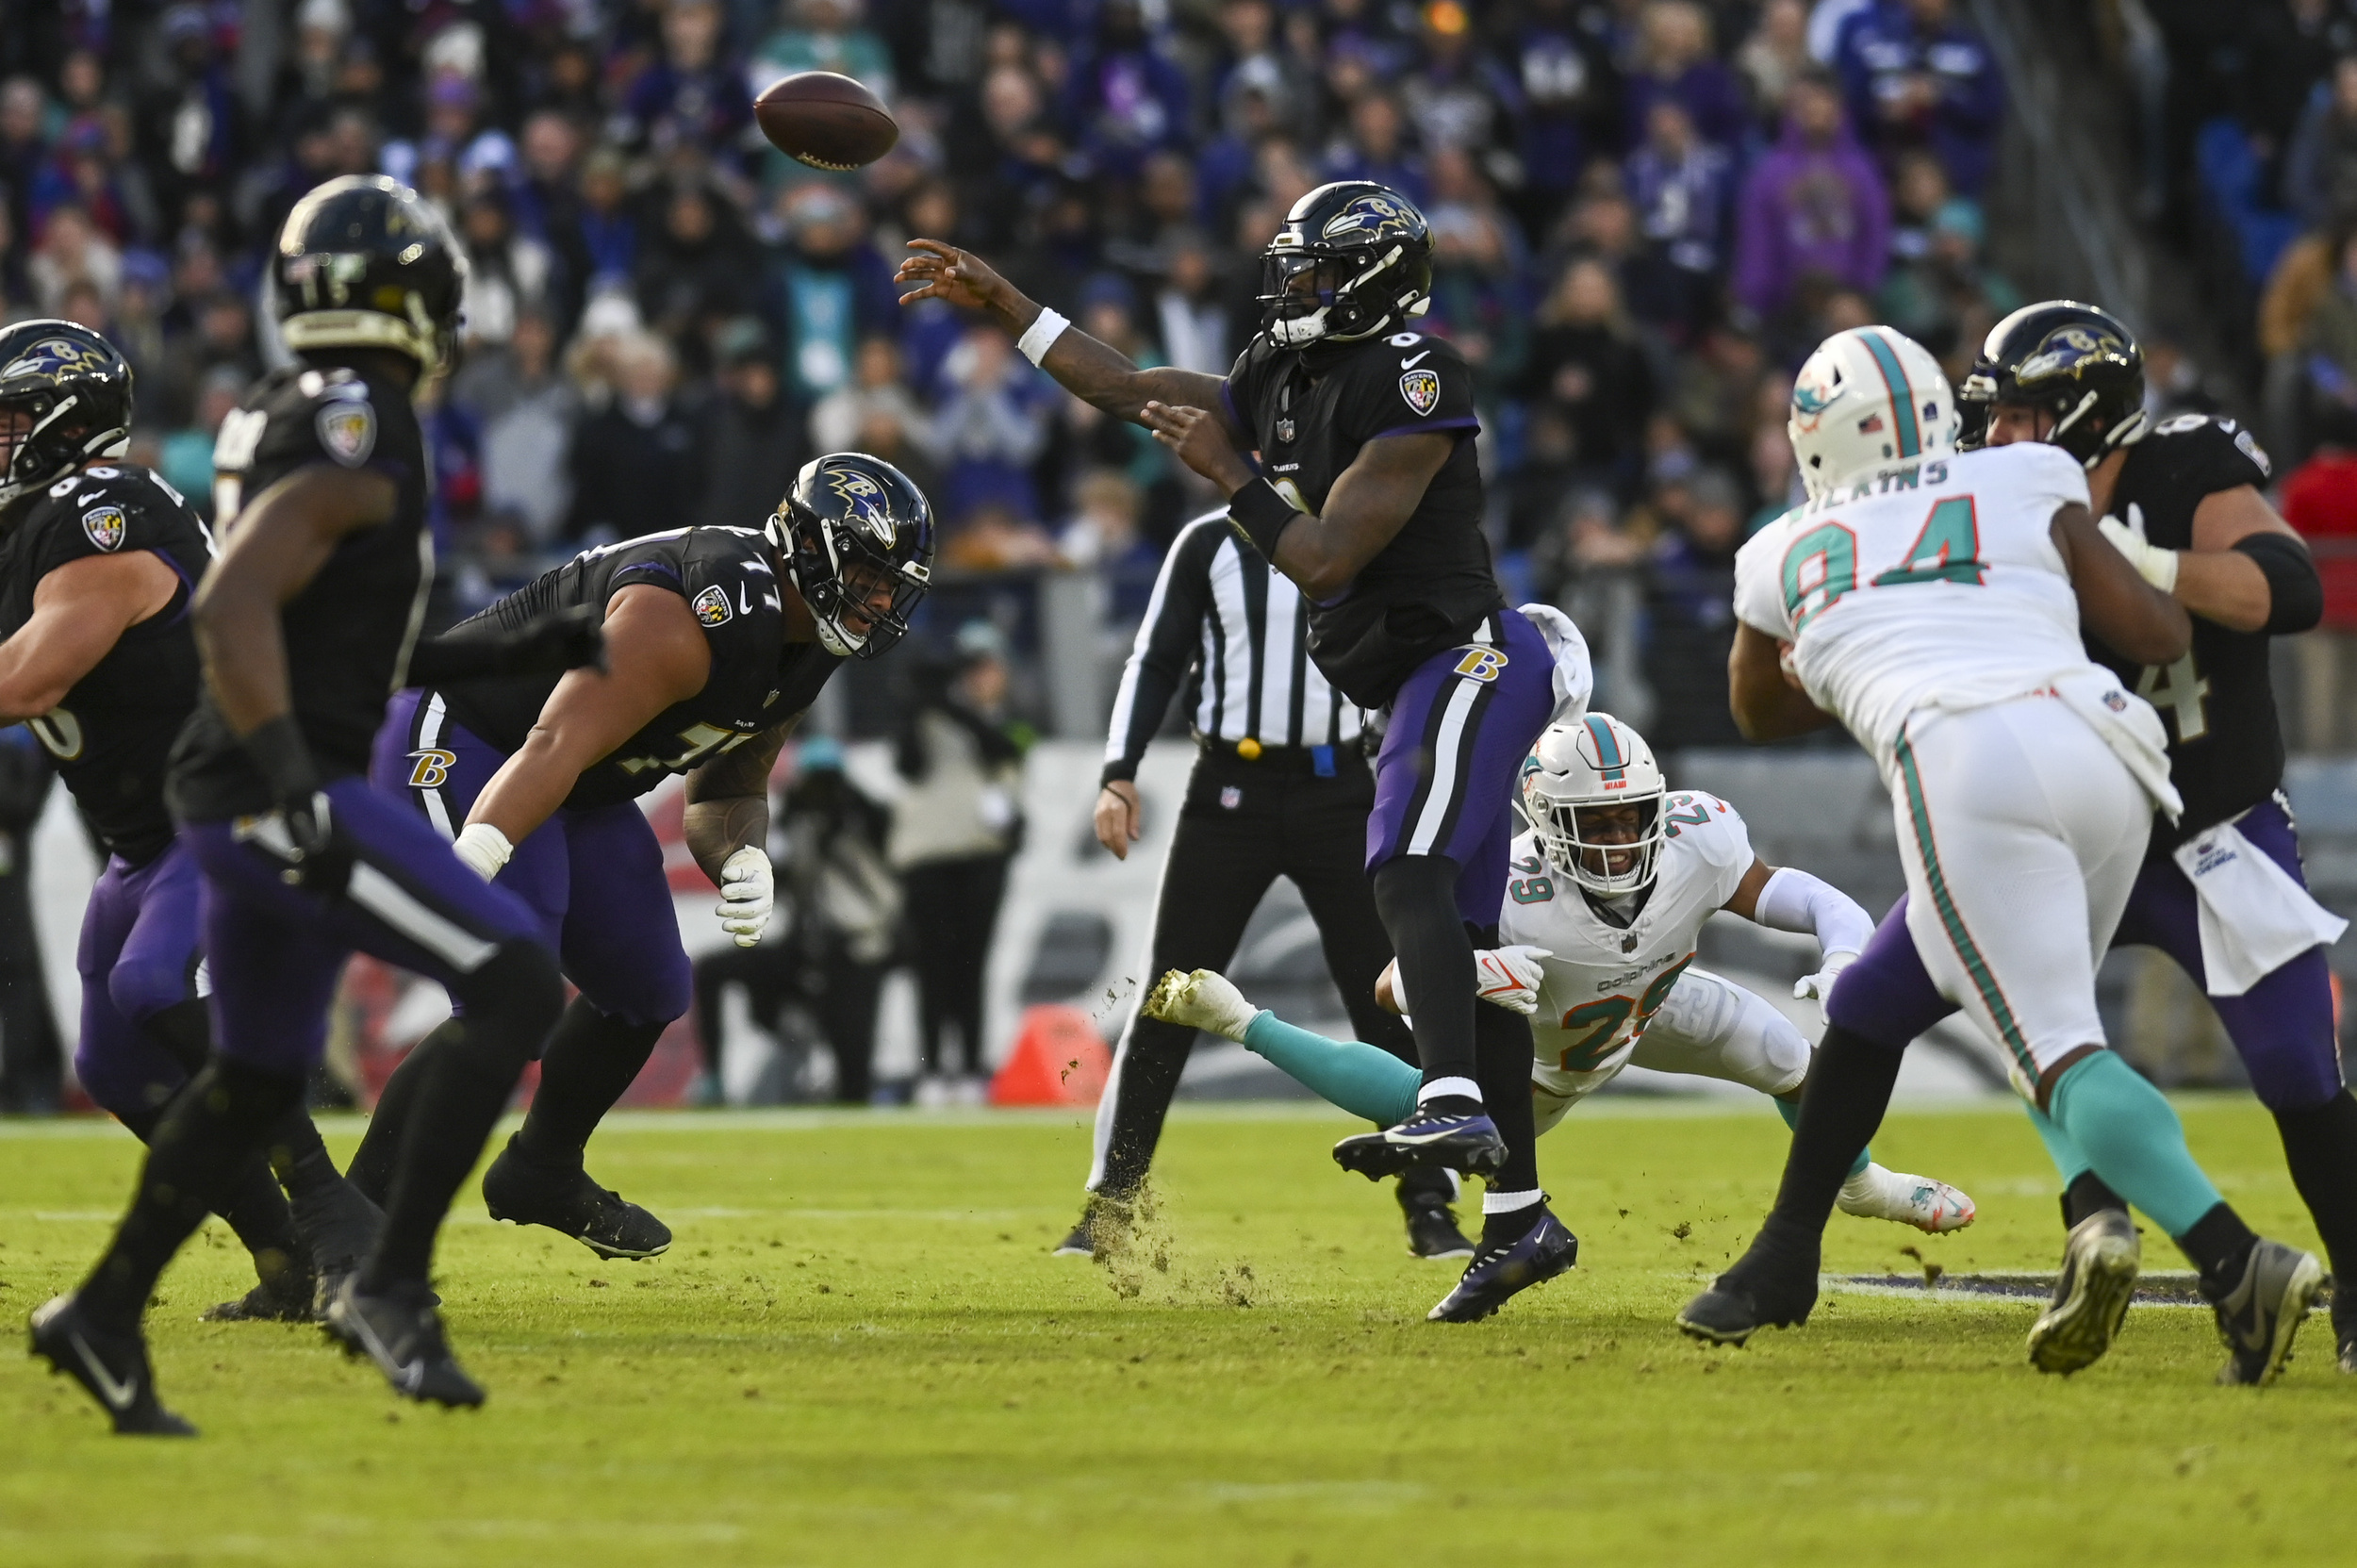 ravens dominate dolphins, clinch no. 1 seed in afc